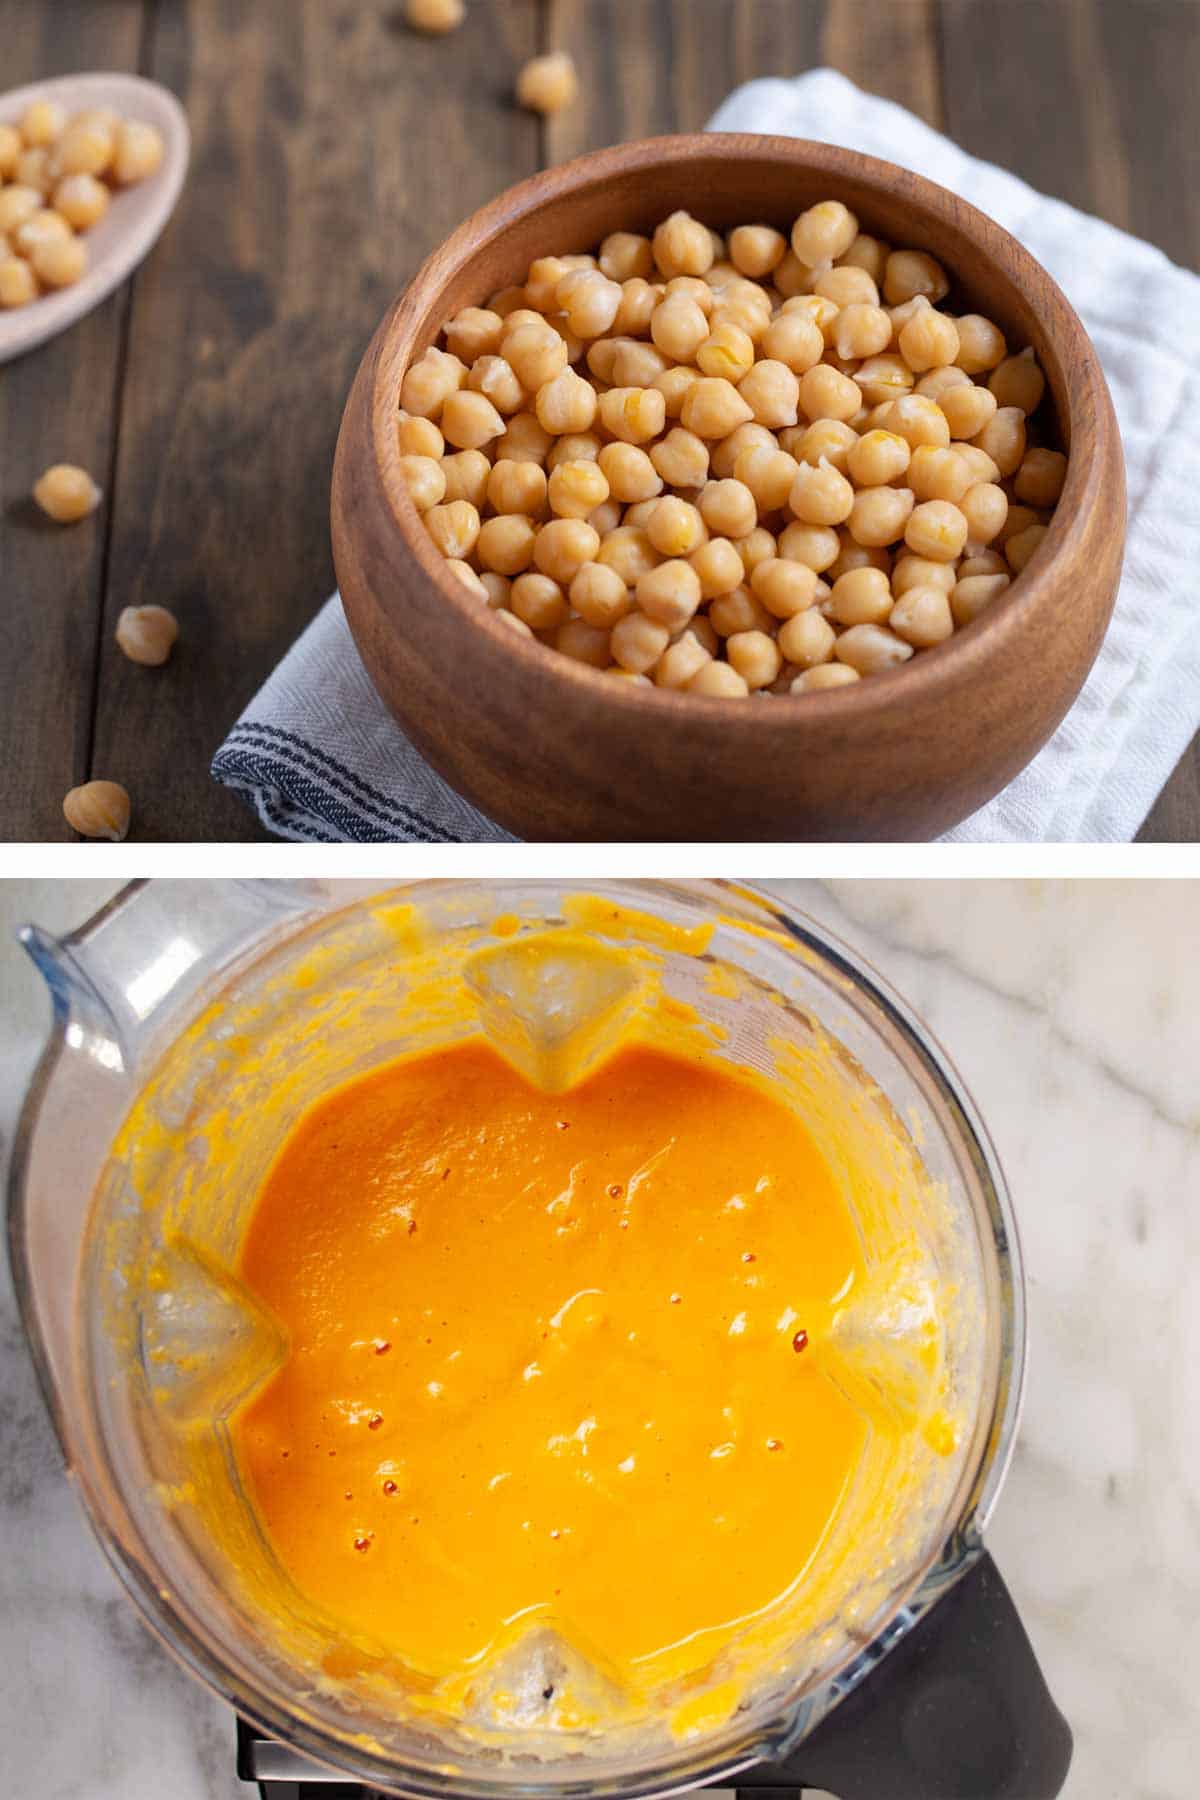 Bowl of cooked chickpeas and a blender with blended chickpeas and pumpkin soup.